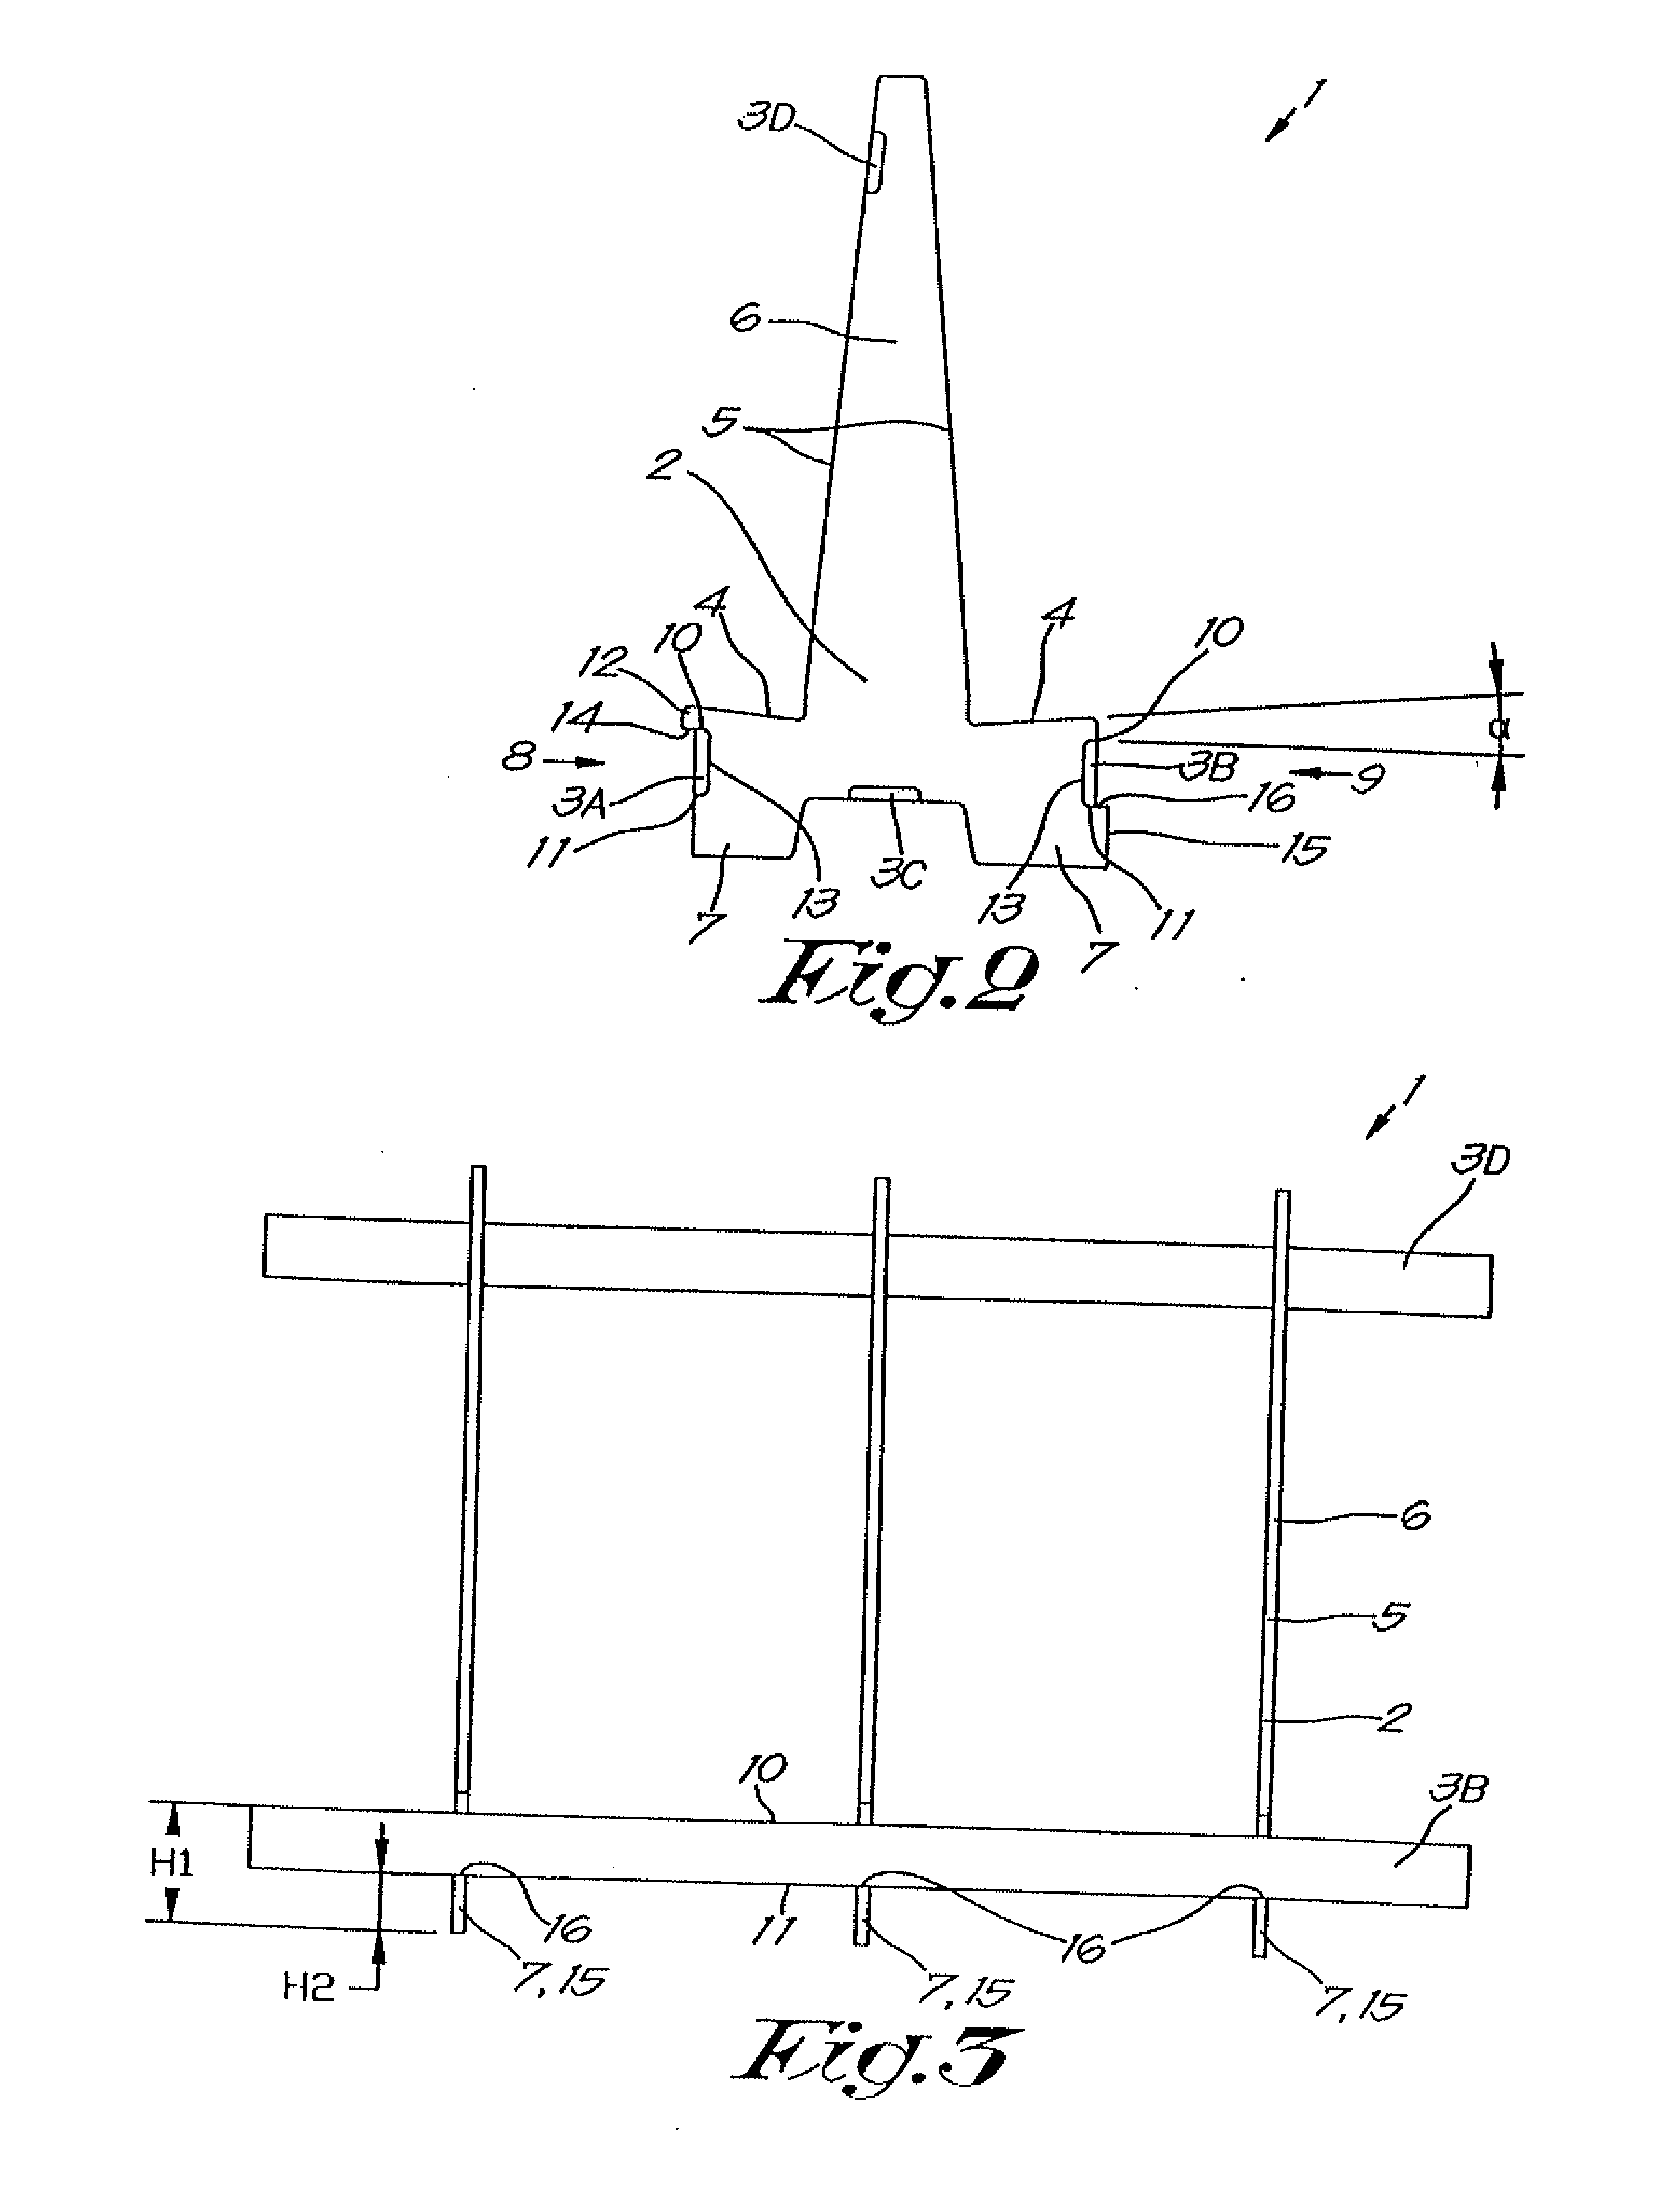 Element for the storage, handling and transport of essentially sheet-form objects